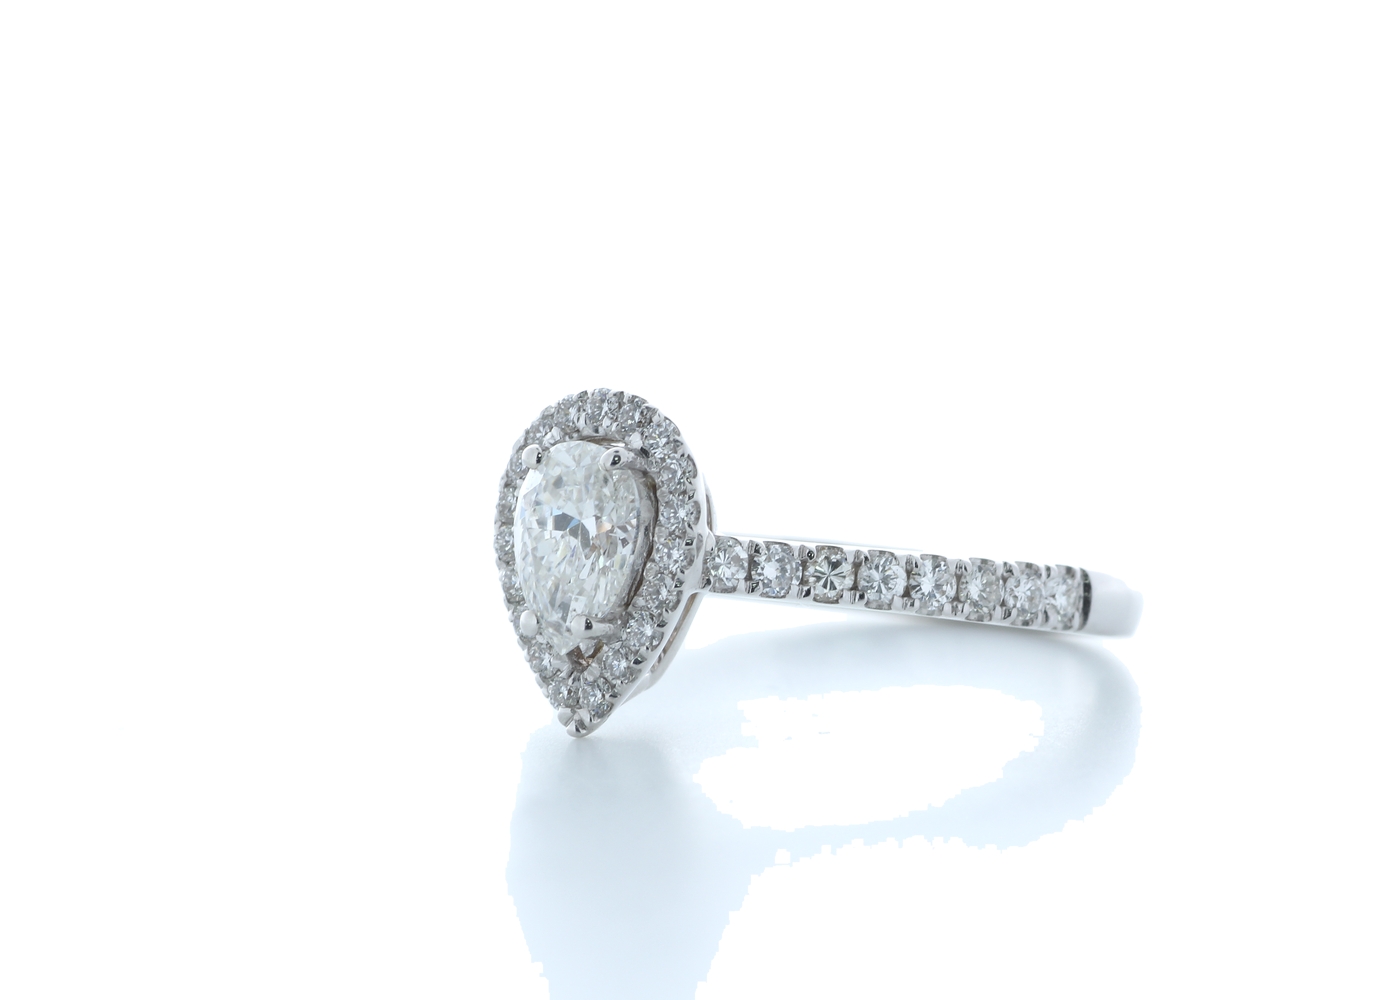 18ct White Gold Single Stone With Halo Setting Ring 0.91 (0.51) Carats - Image 2 of 5